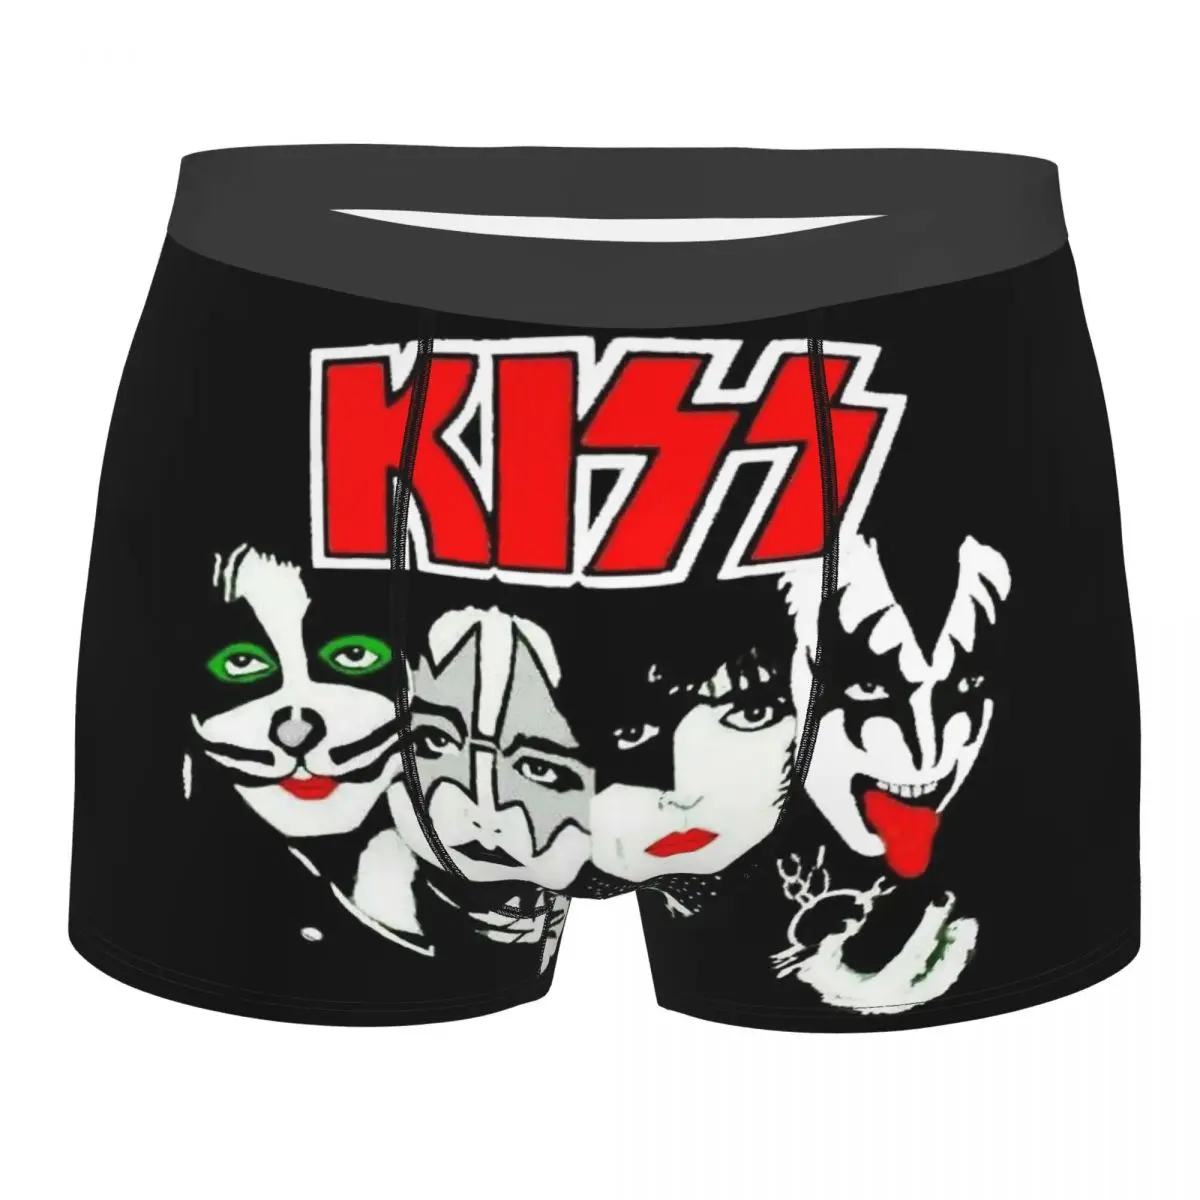 The Demon Kiss Band Gene Simmons Accessories Crew Man's Boxer Briefs Underpants Highly Breathable Top Quality Gift Idea kiss band fire logosocks sport socks men man gift idea